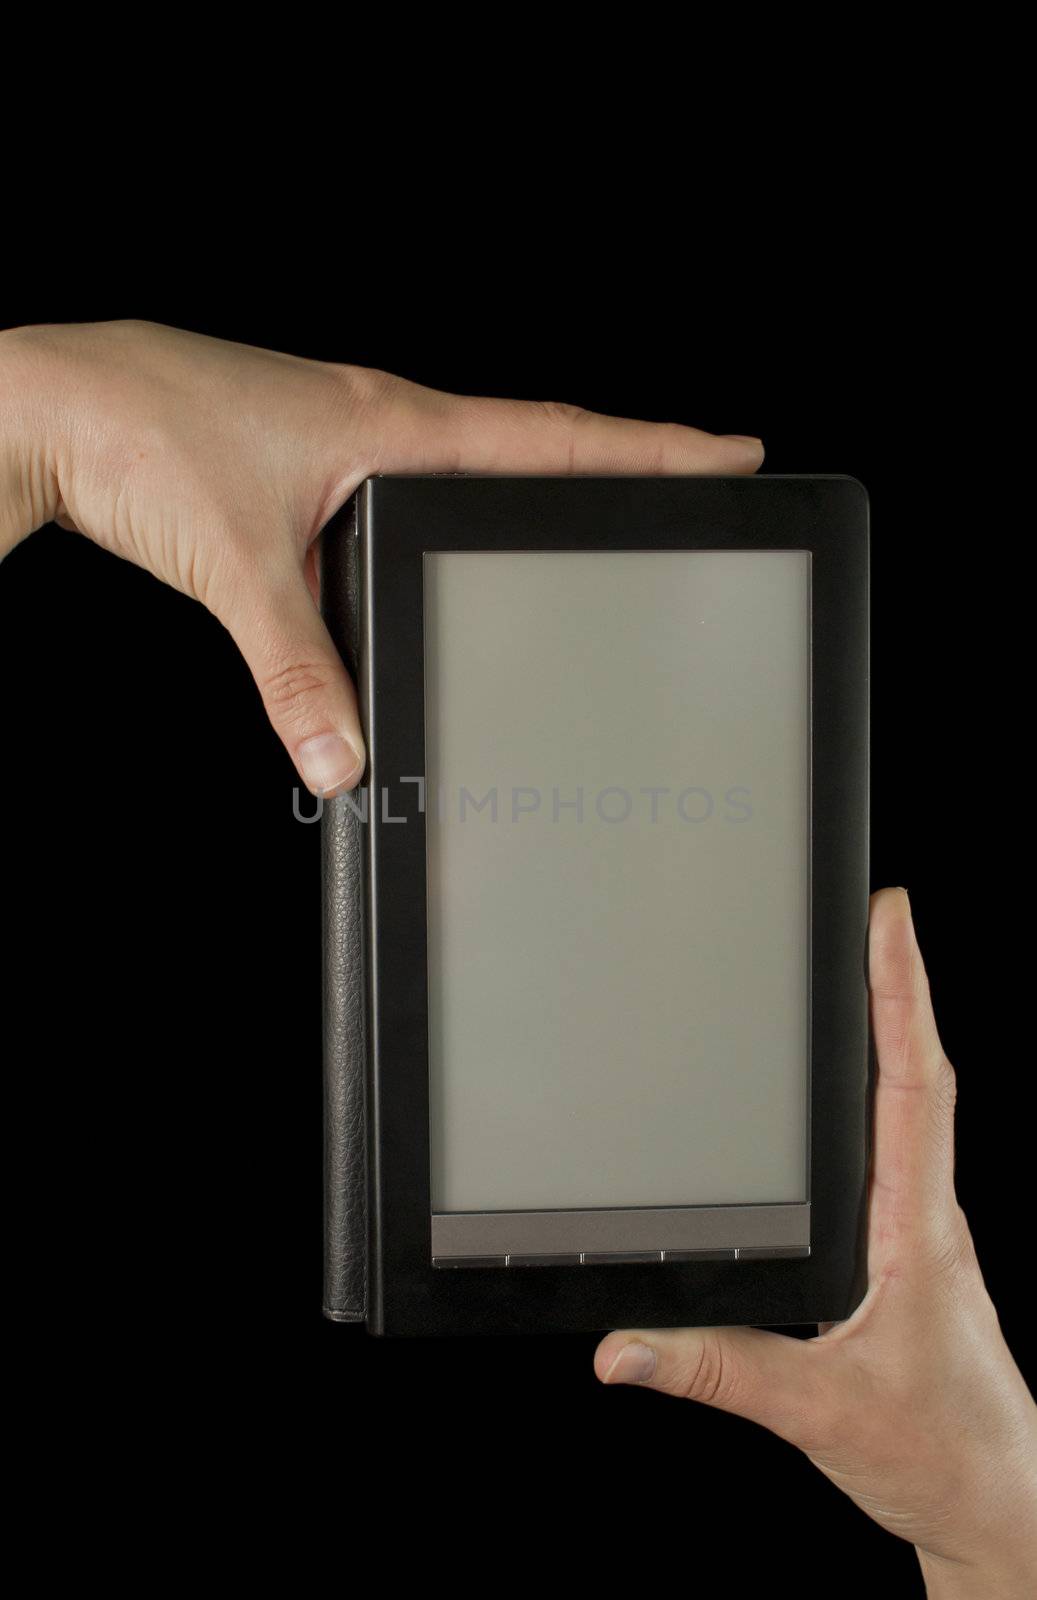 Hand holding an electronic book reader by AndreyKr